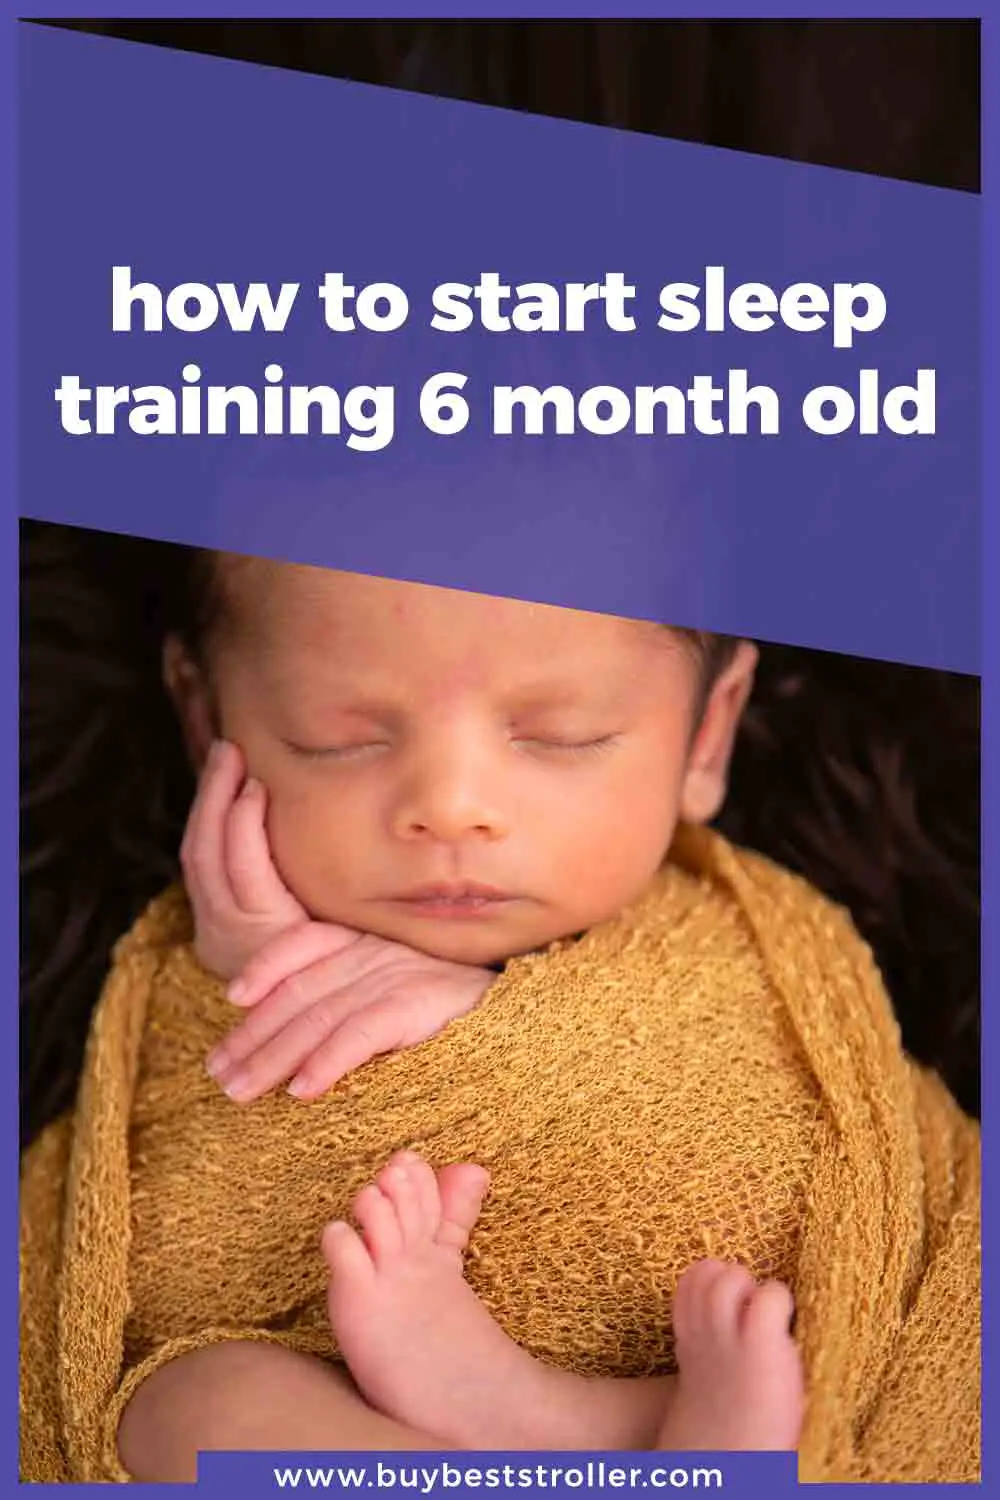 how-to-start-sleep-training-6-month-old